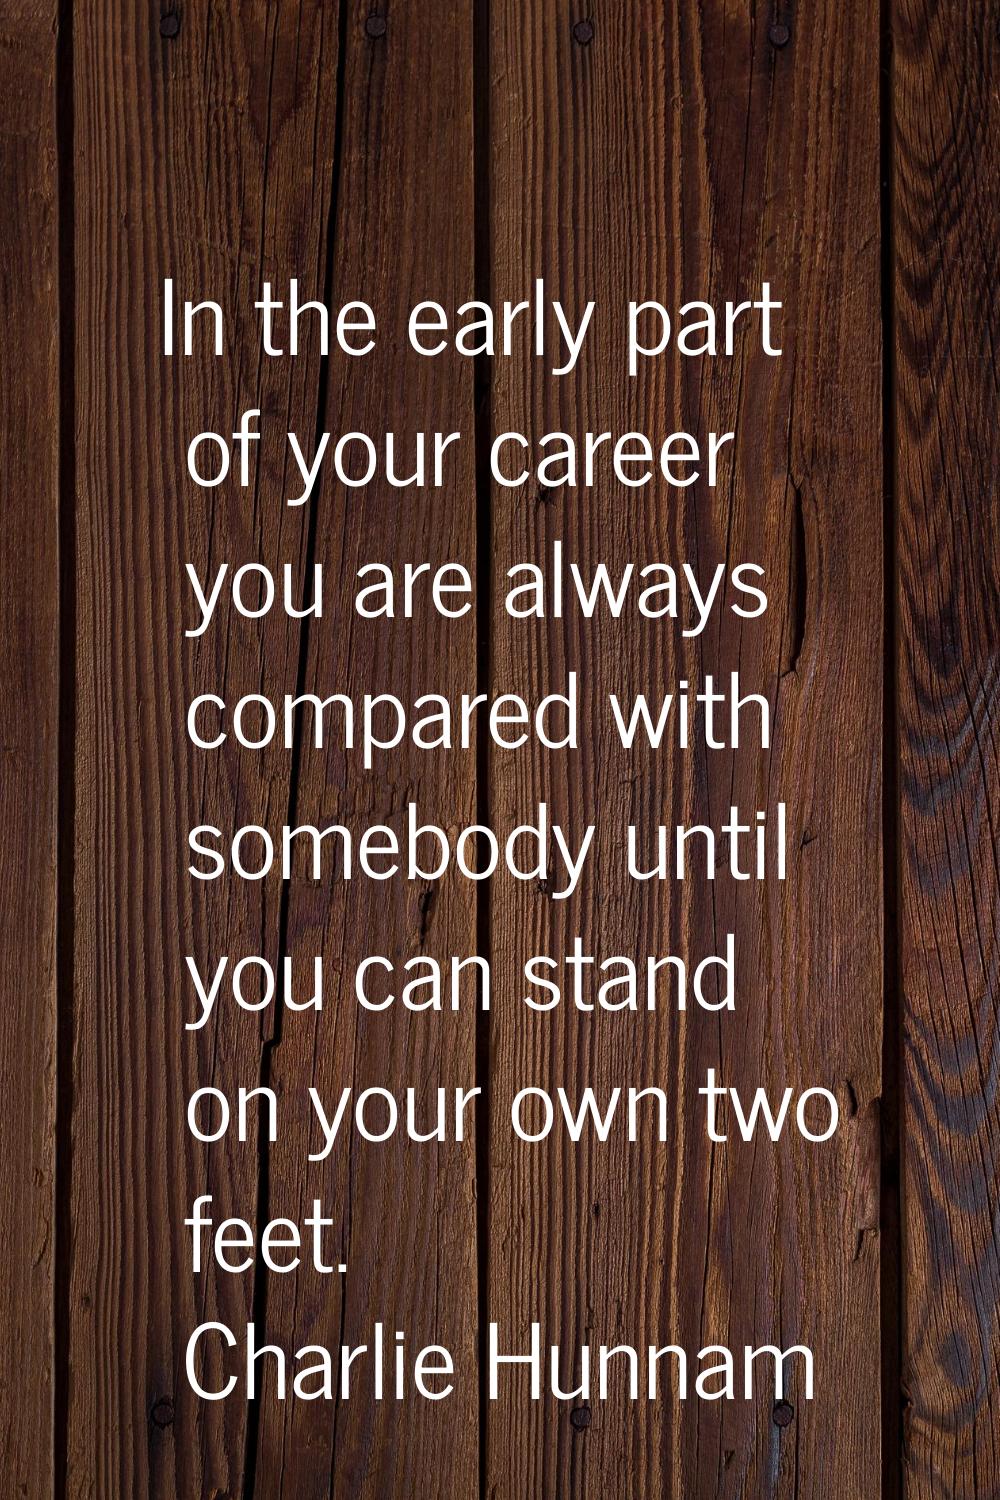 In the early part of your career you are always compared with somebody until you can stand on your 